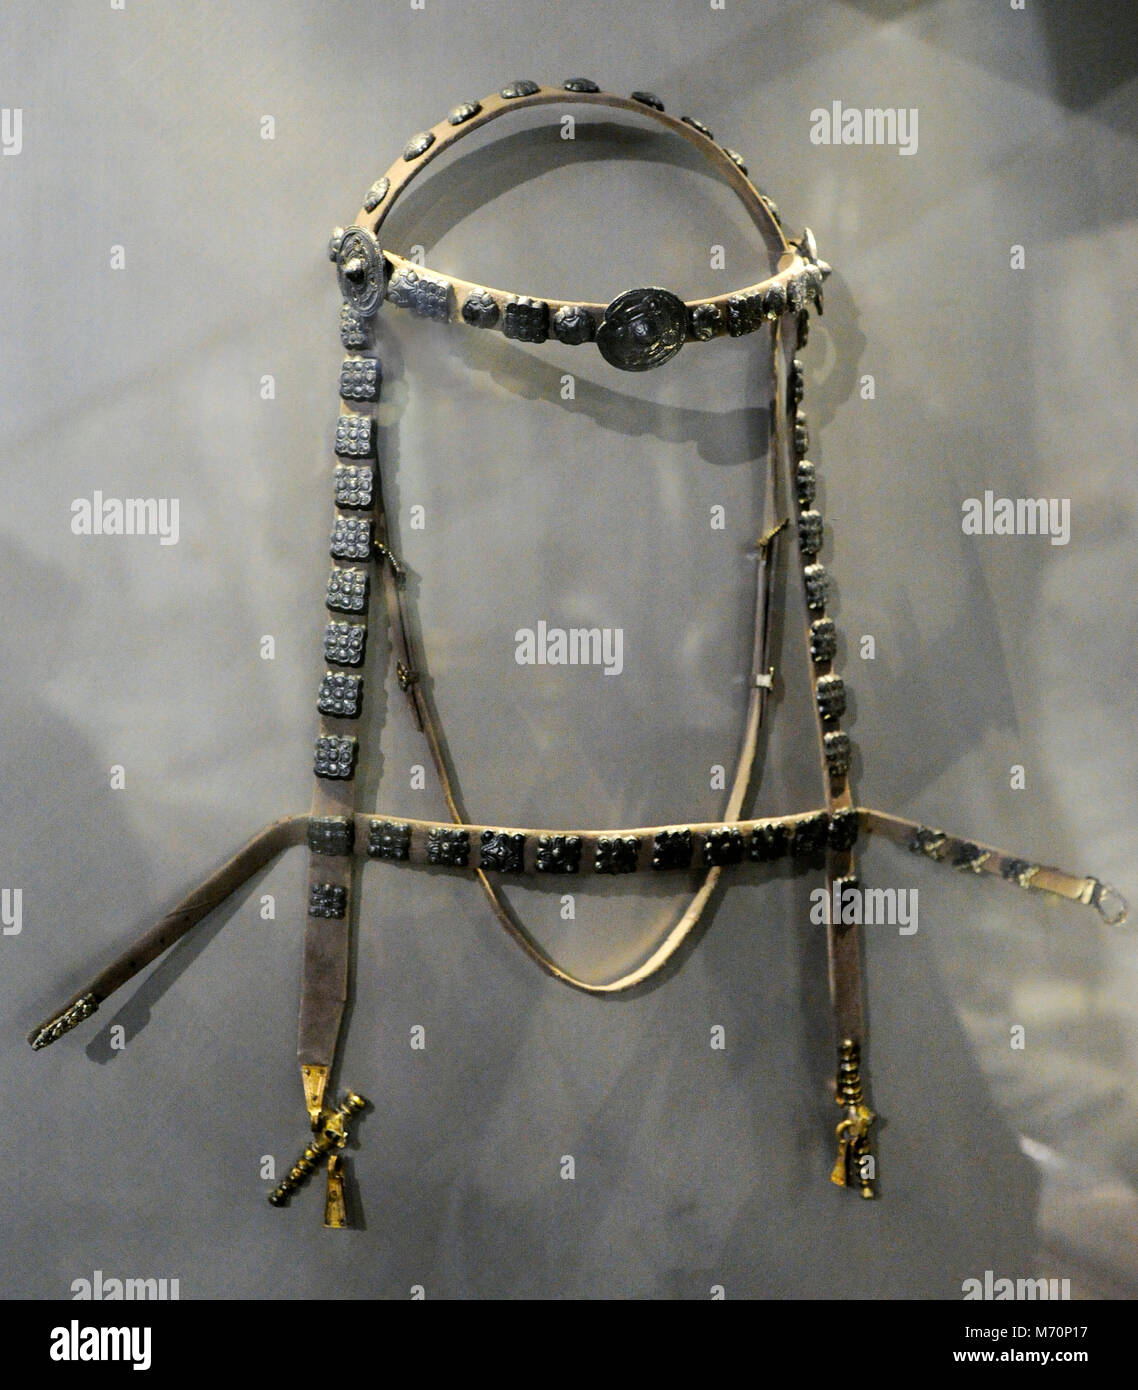 Bridle for horses. Tomb of the Gokstad Ship. Viking Ship Museum. Oslo. Norway. Stock Photo